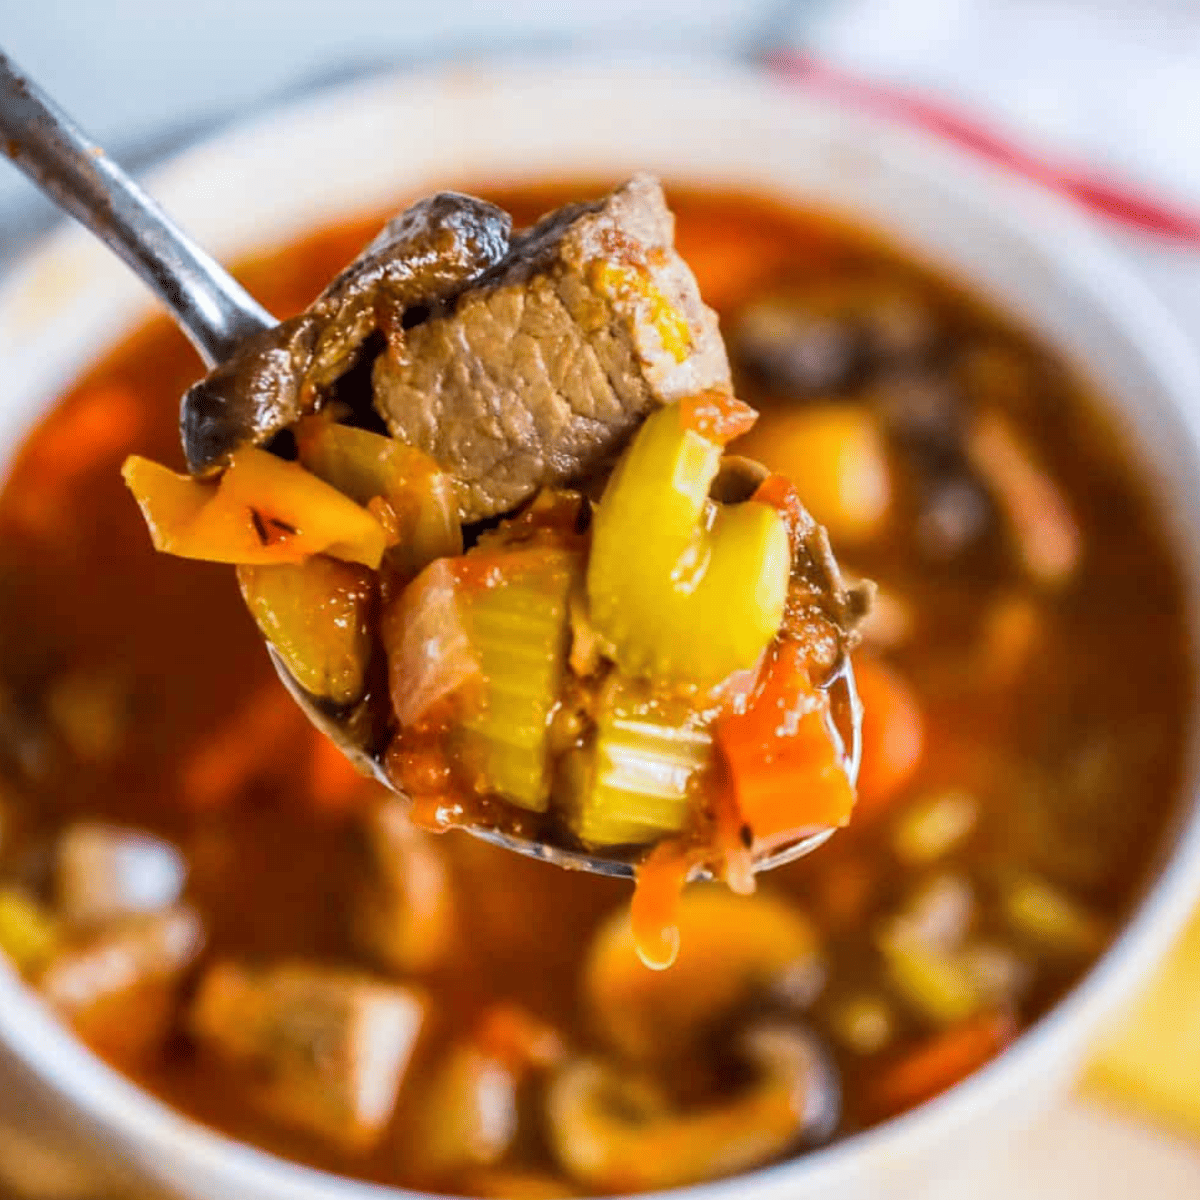 A spoonful of hearty Instant Pot steak soup with chunks of meat and vegetables, above a bowl of the same soup.